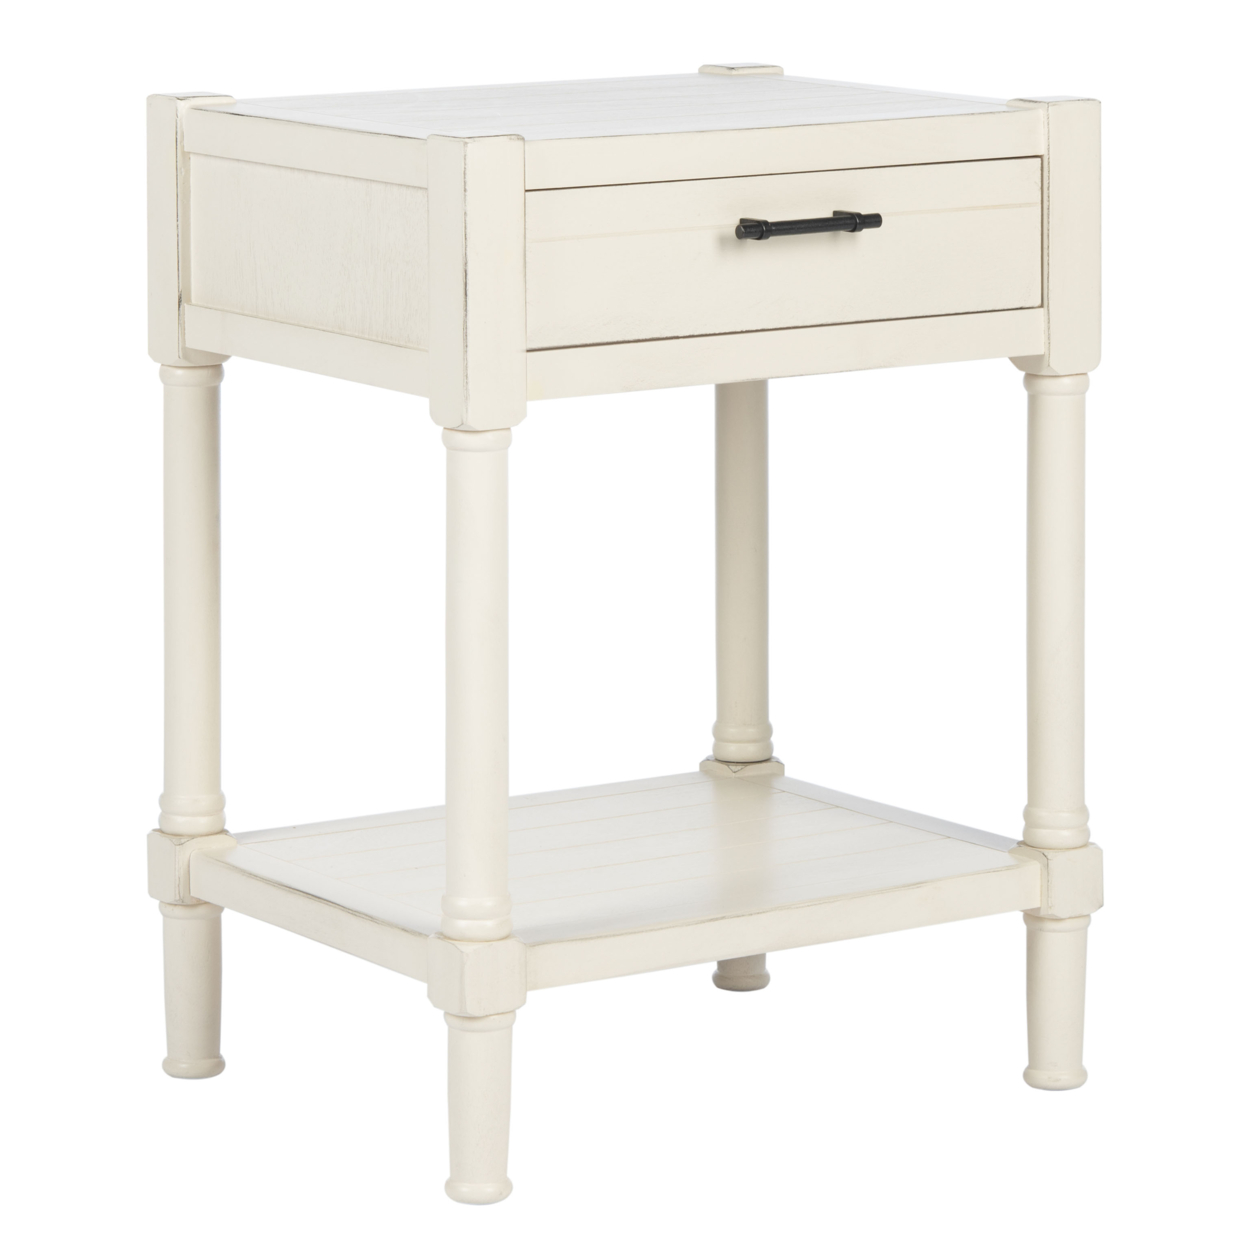 SAFAVIEH Filbert 1-Drawer Accent Table Distressed White